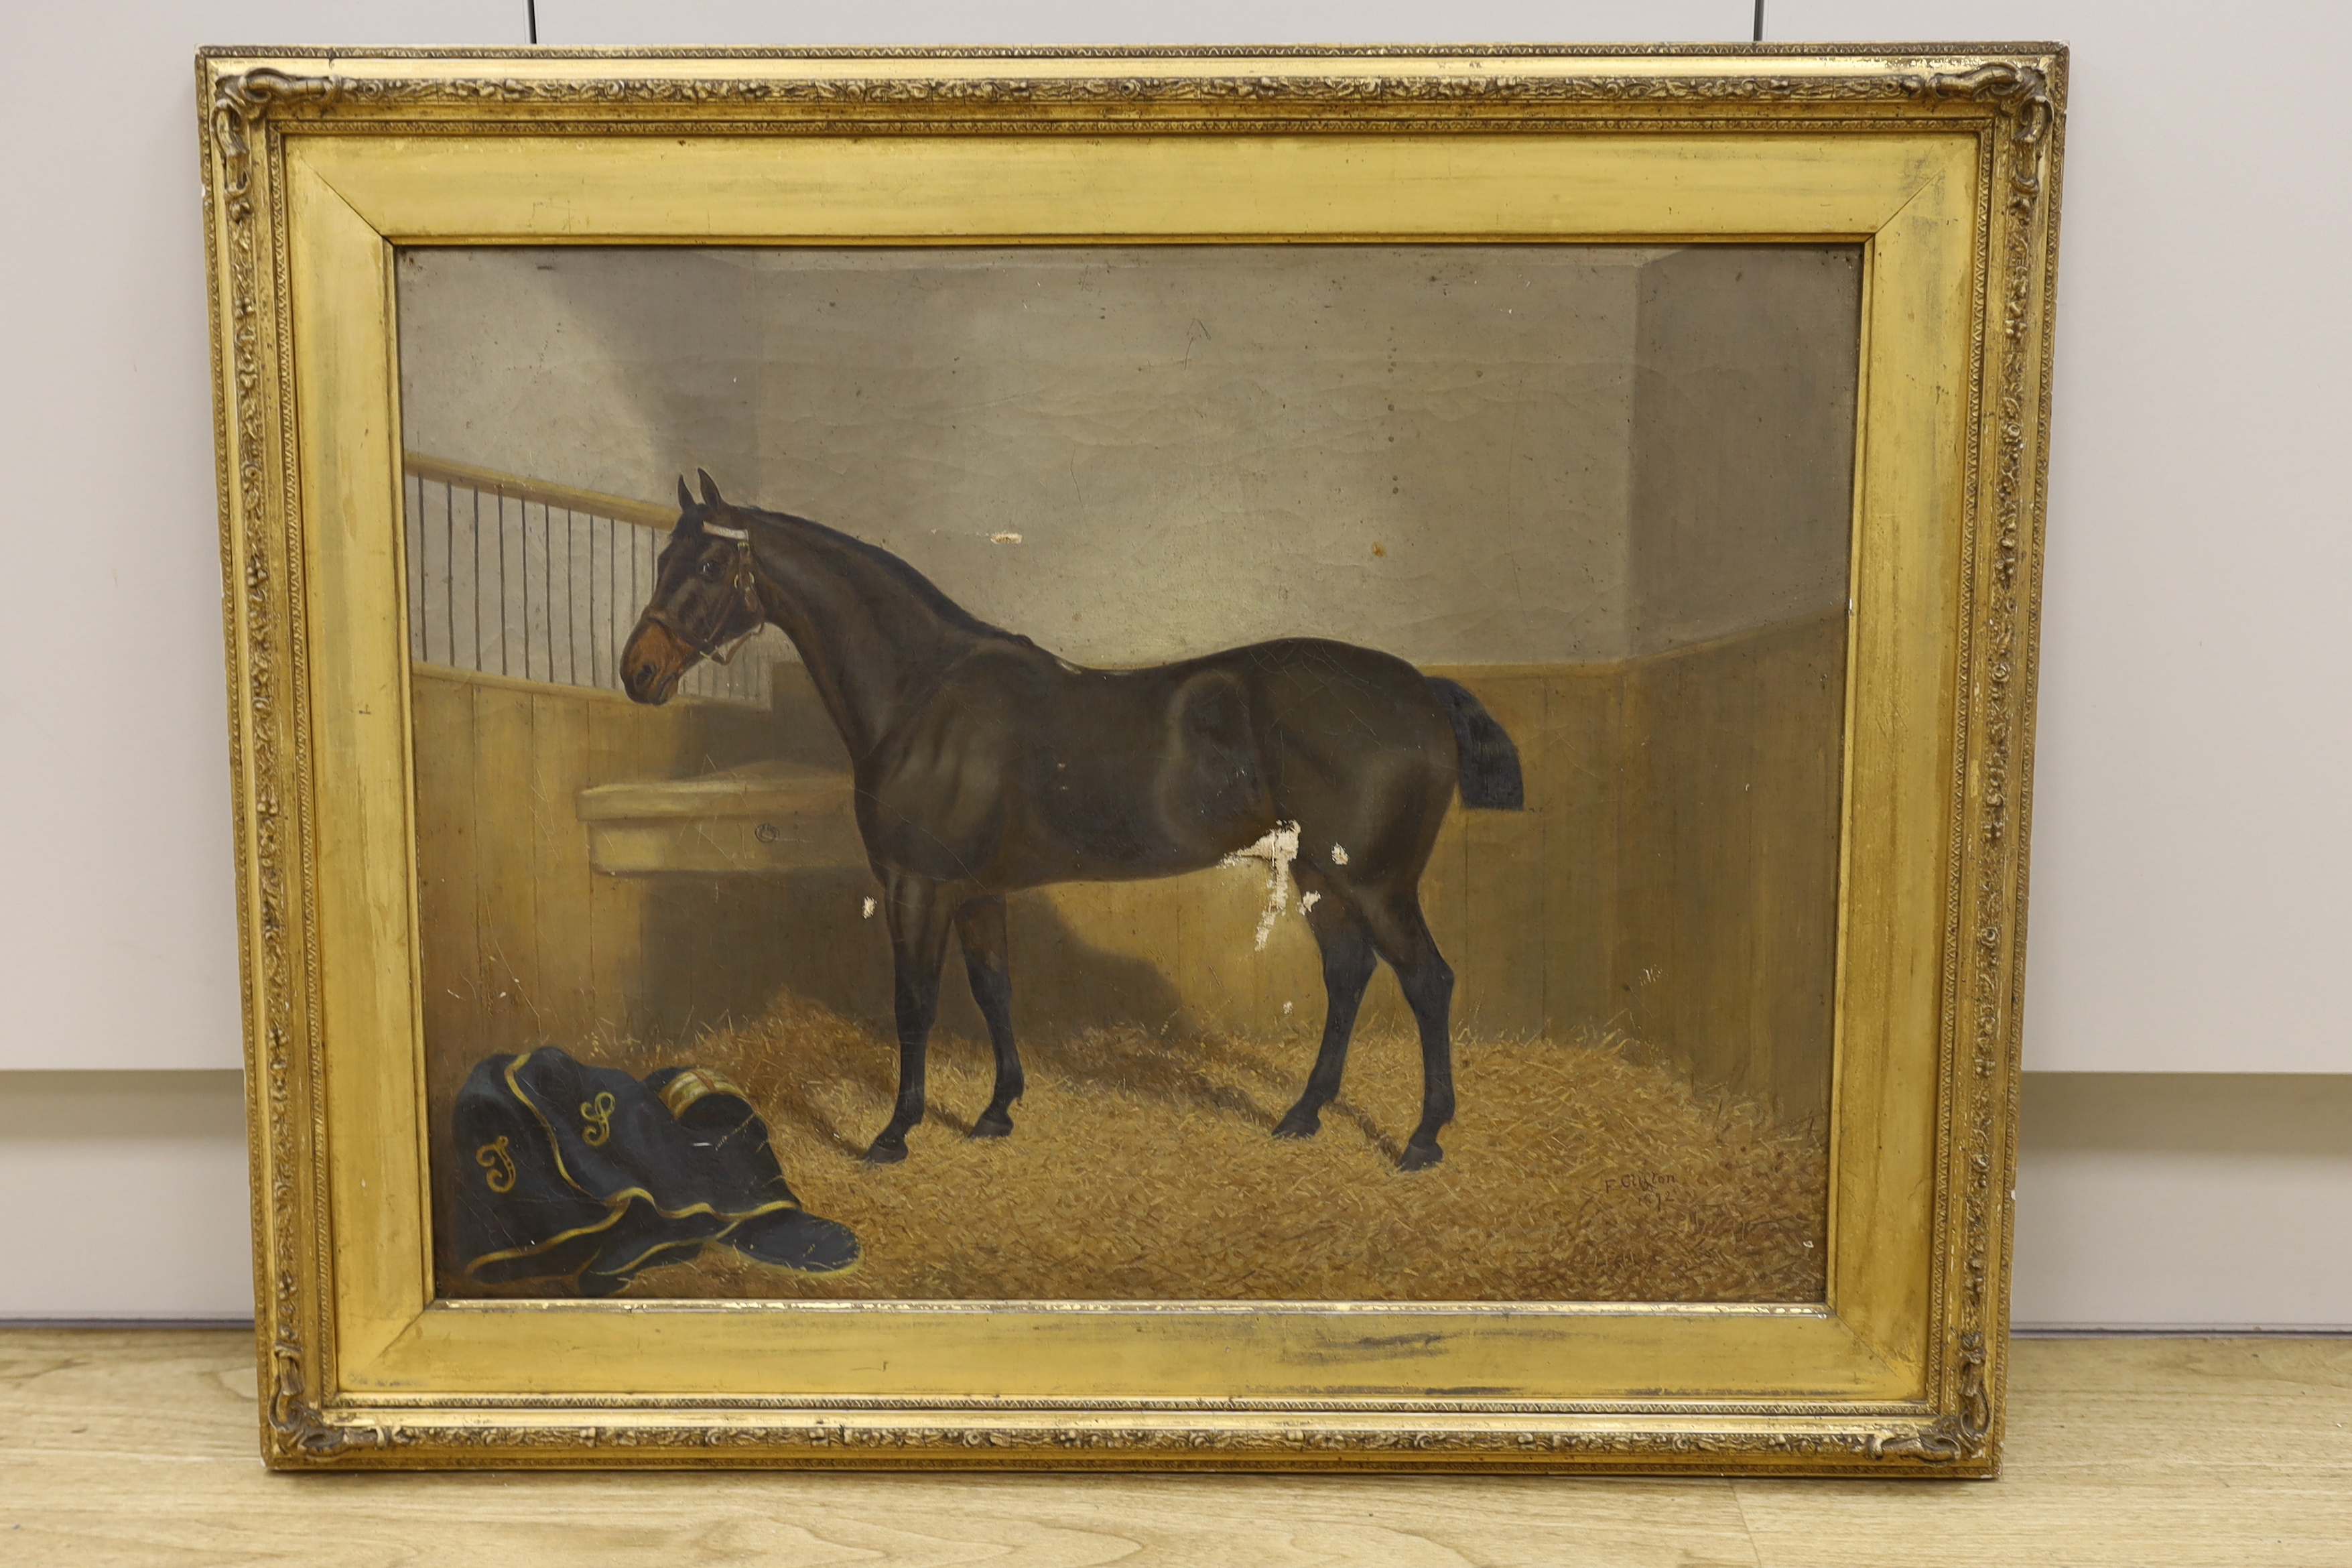 F. Clifton (19th century) oil on canvas, Study of a horse in a stable, signed and dated 1892, George Rowney & Co. London stamp verso, 60 x 45cm